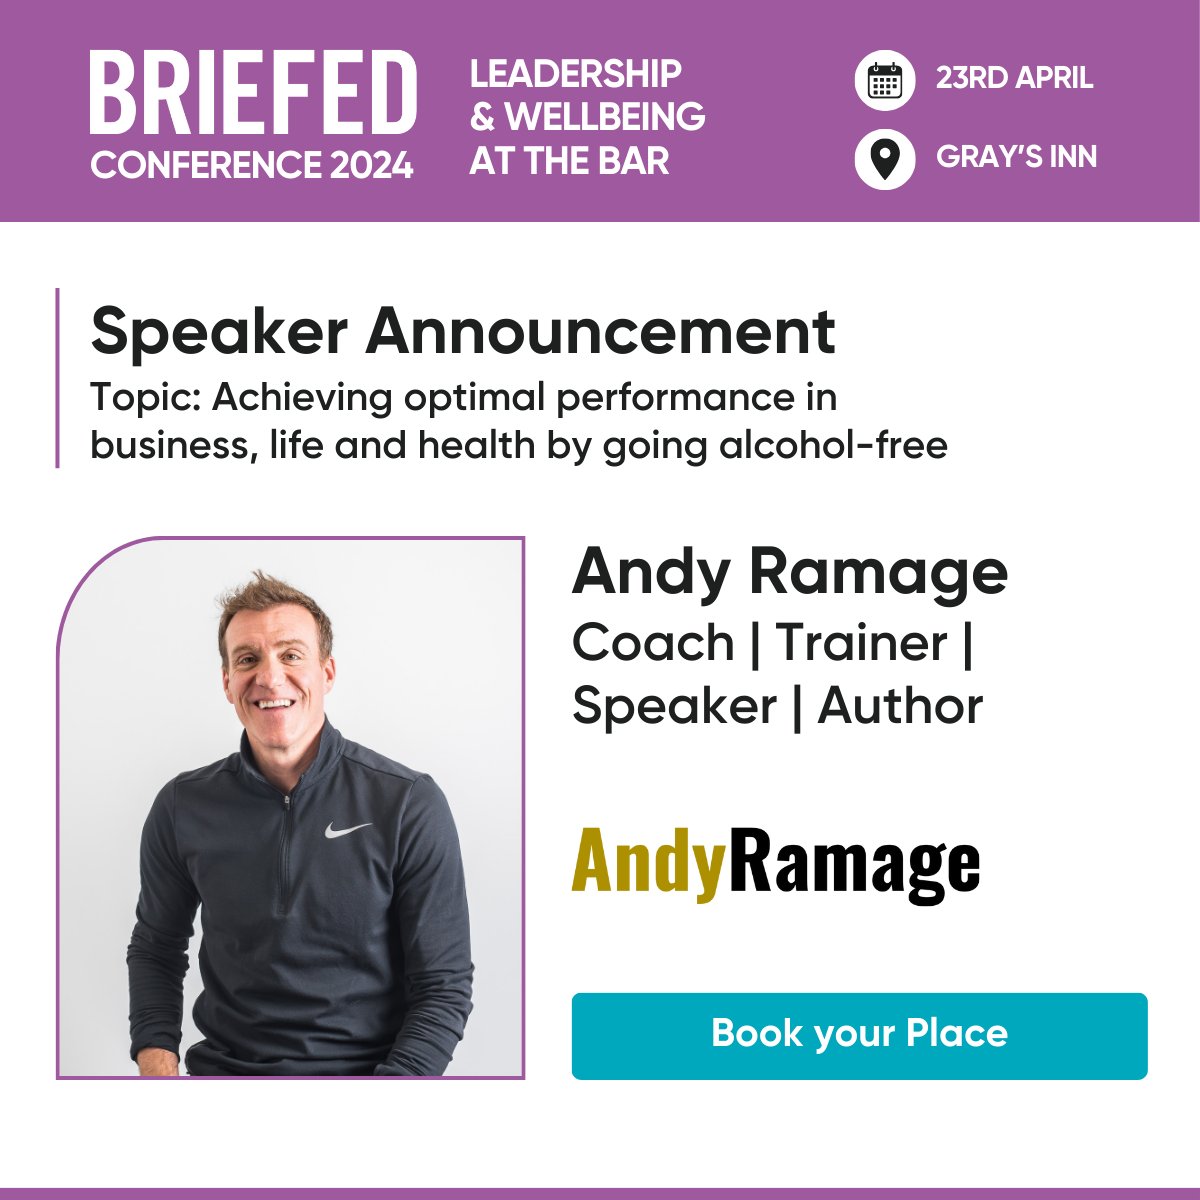 📢To kick off our conference speakers, we have @AndyRamageAF, world-renowned speaker and entrepreneur, former professional athlete, and elite performance coach. Watch him deliver an inspiring leadership session on the impact of alcohol on performance bit.ly/3uOijAO